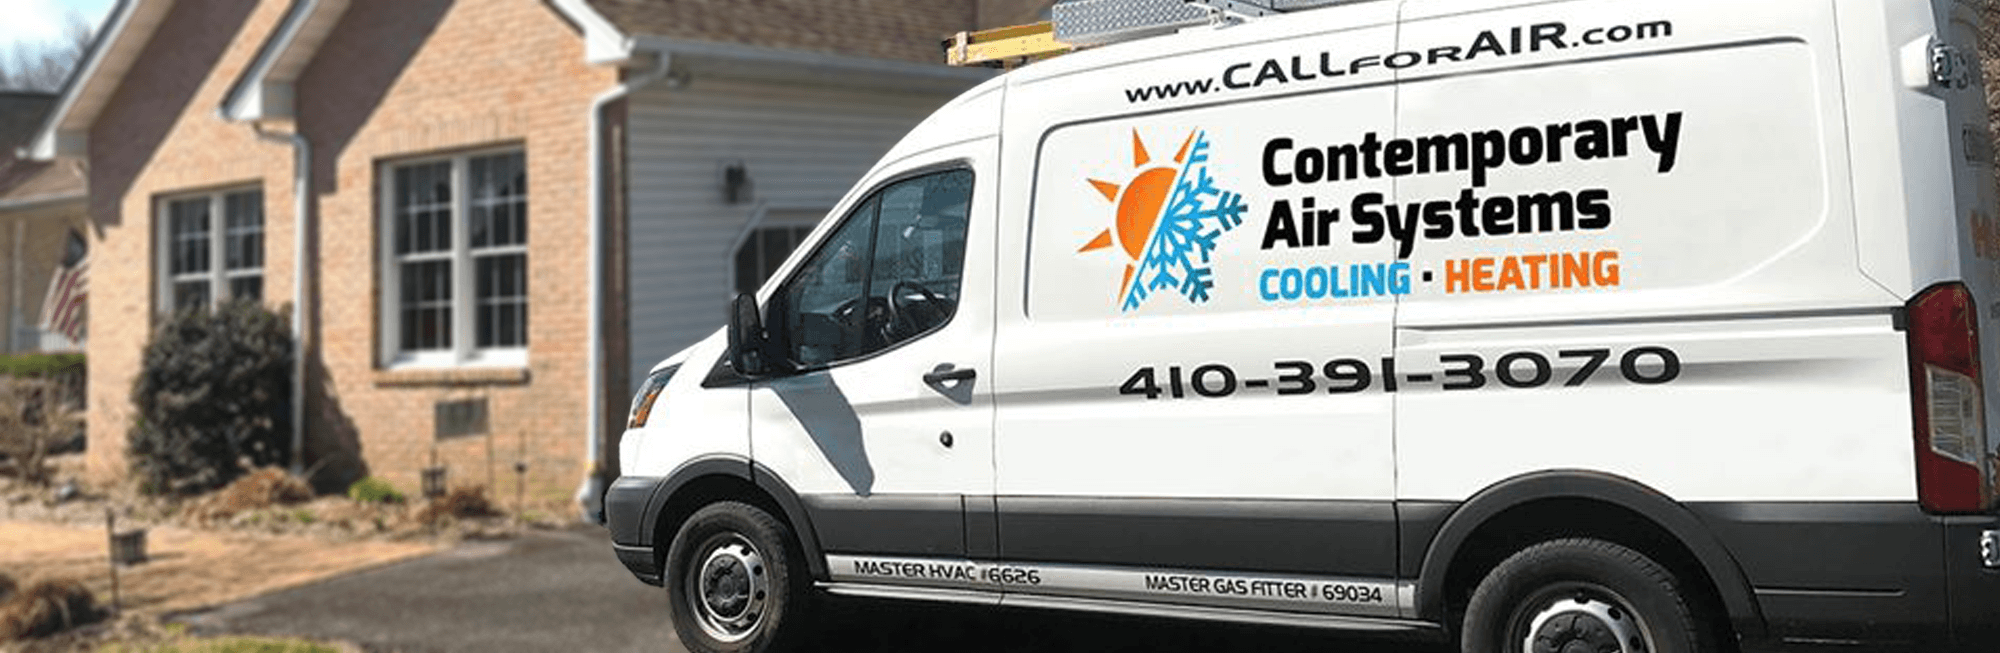 Email us any questions about our AC repair in Dundalk MD